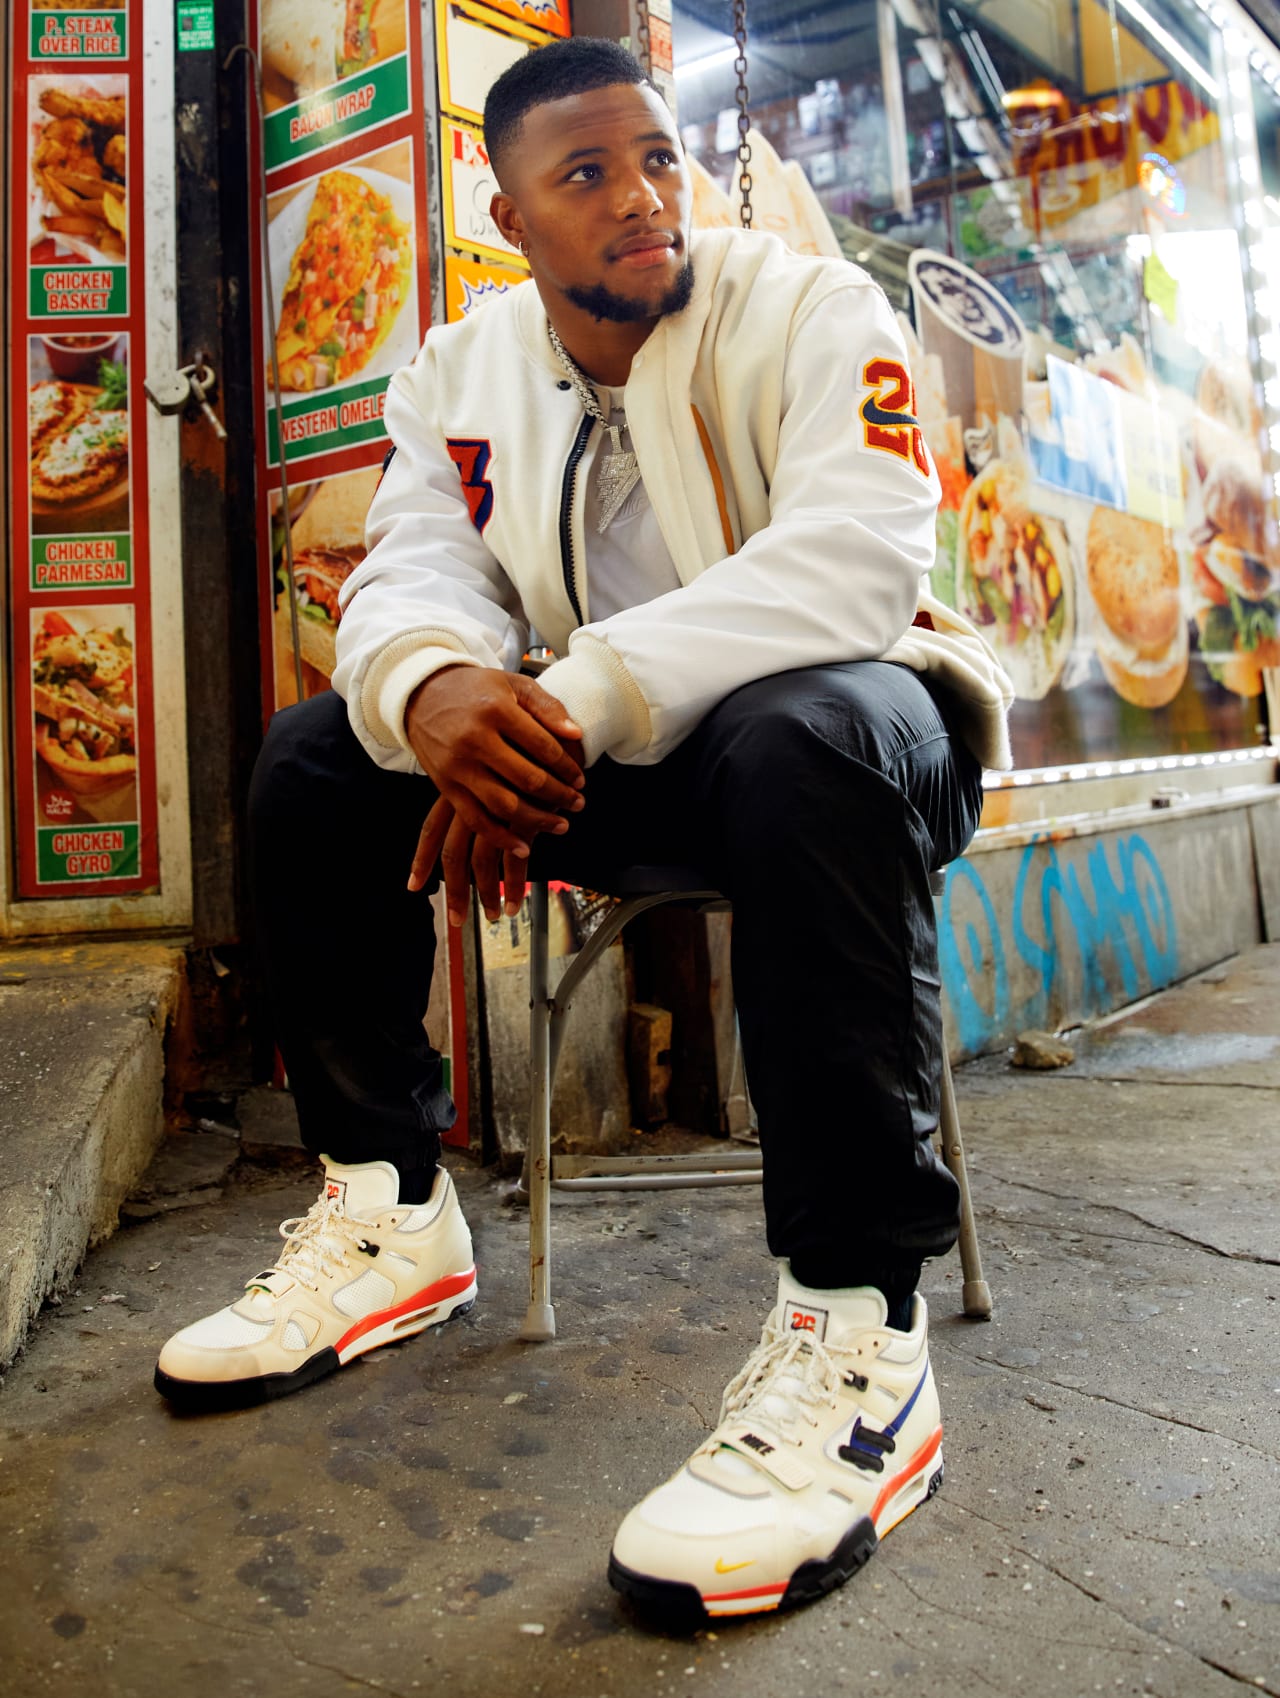 saquon air trainer 3 release date